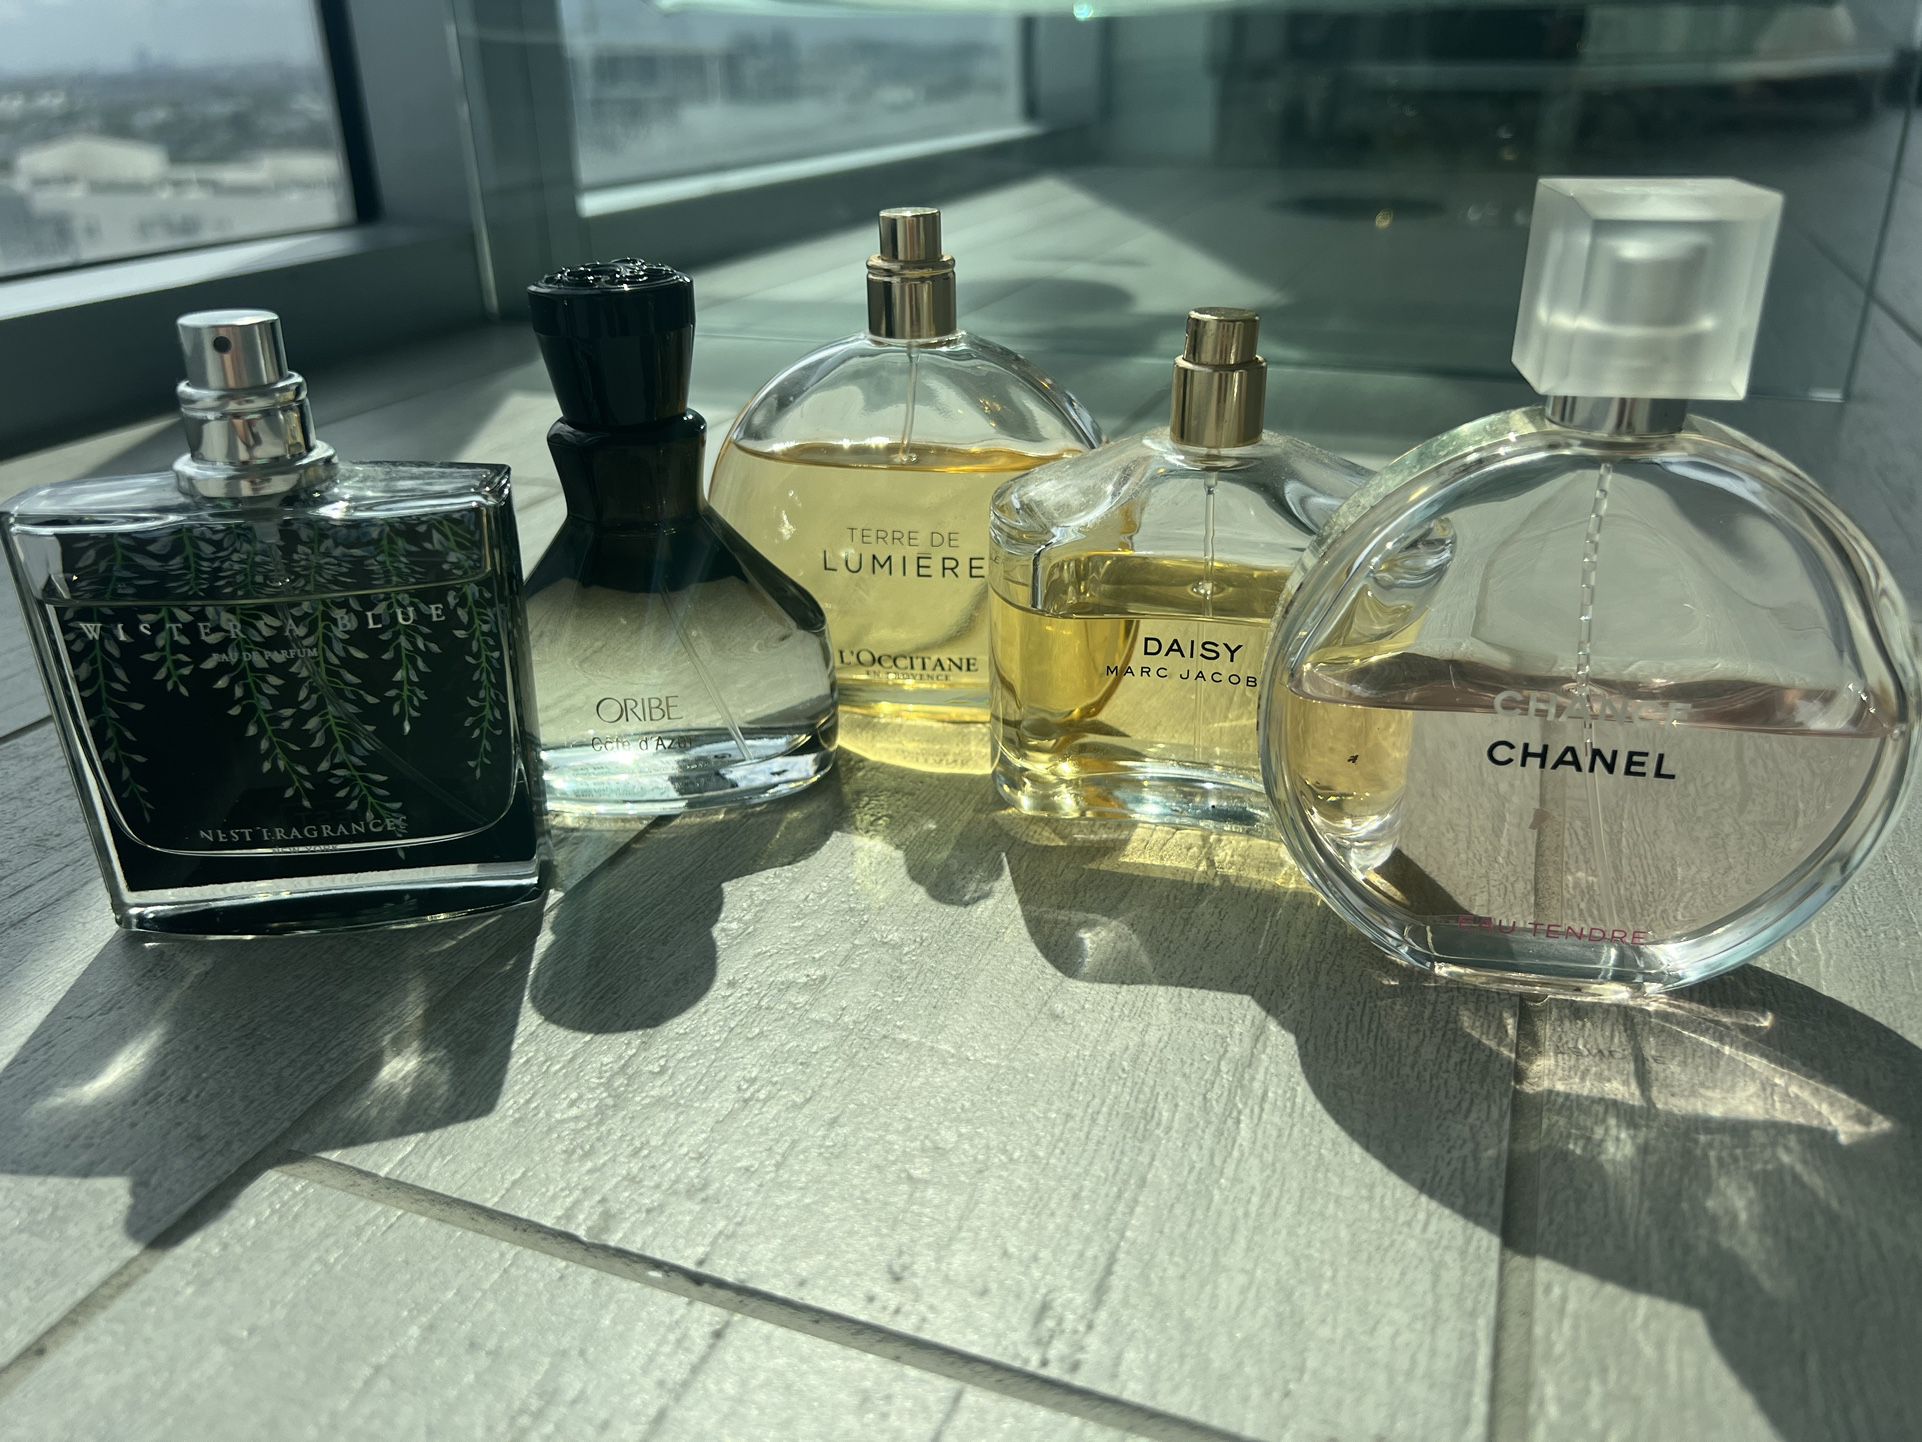 Chanel, Marc Jacobs, L’occitane, Nest, And Oribe Perfume